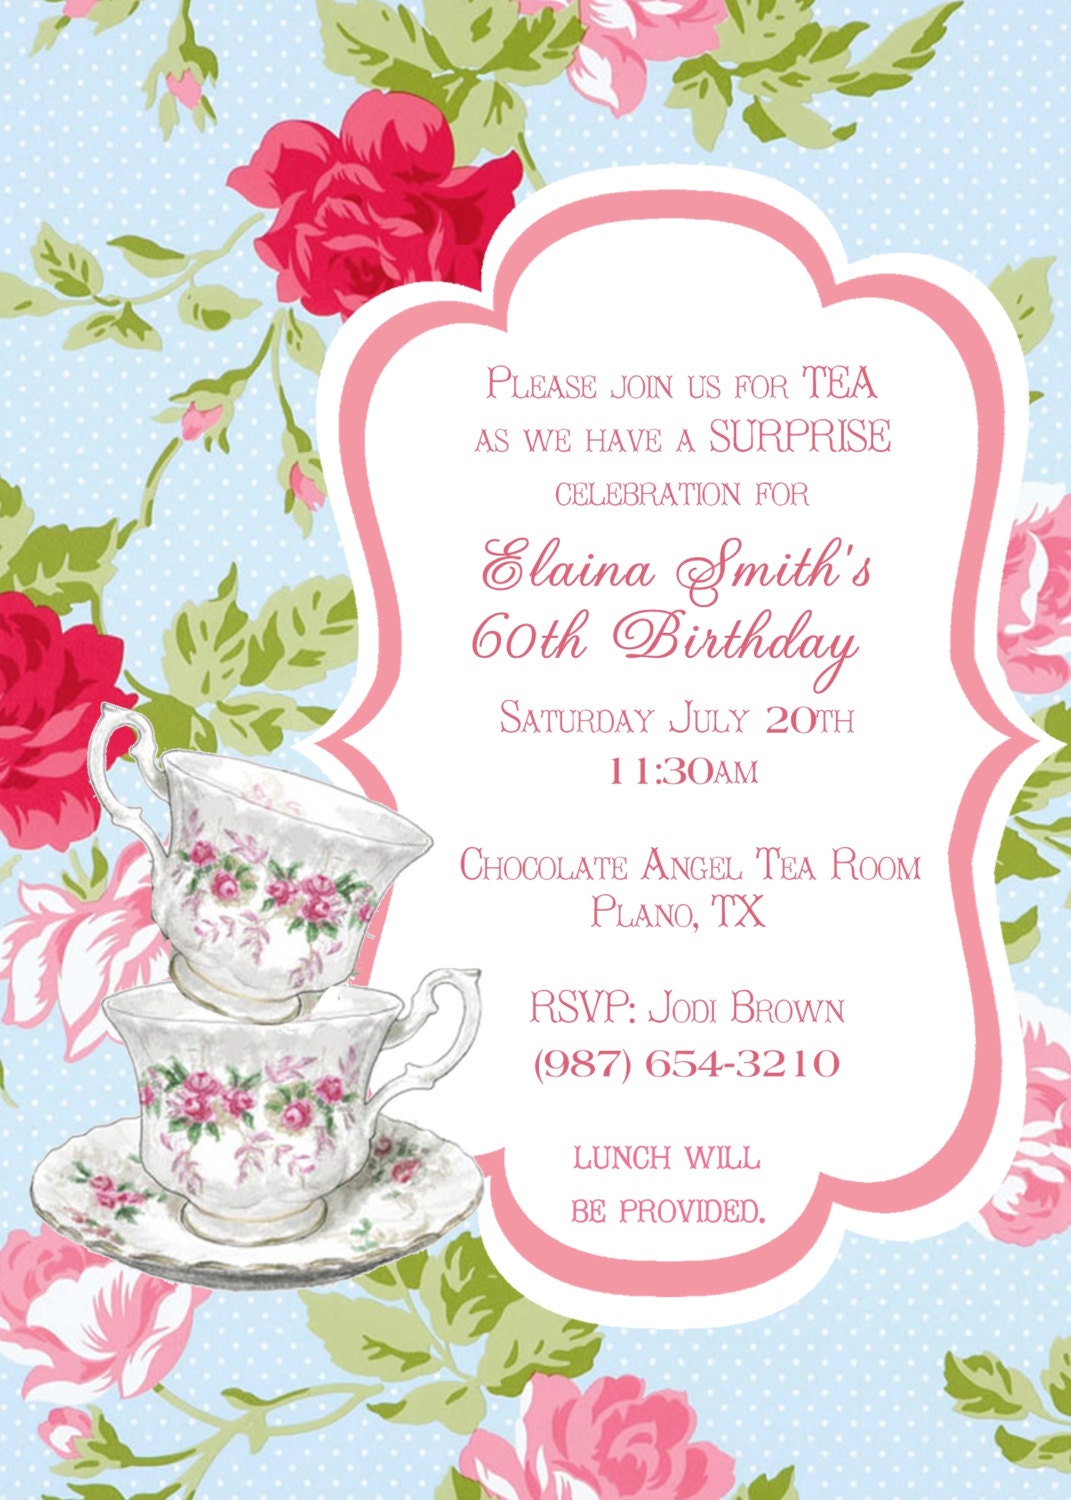 mountain-wedding-invitations-invitations-for-a-tea-party